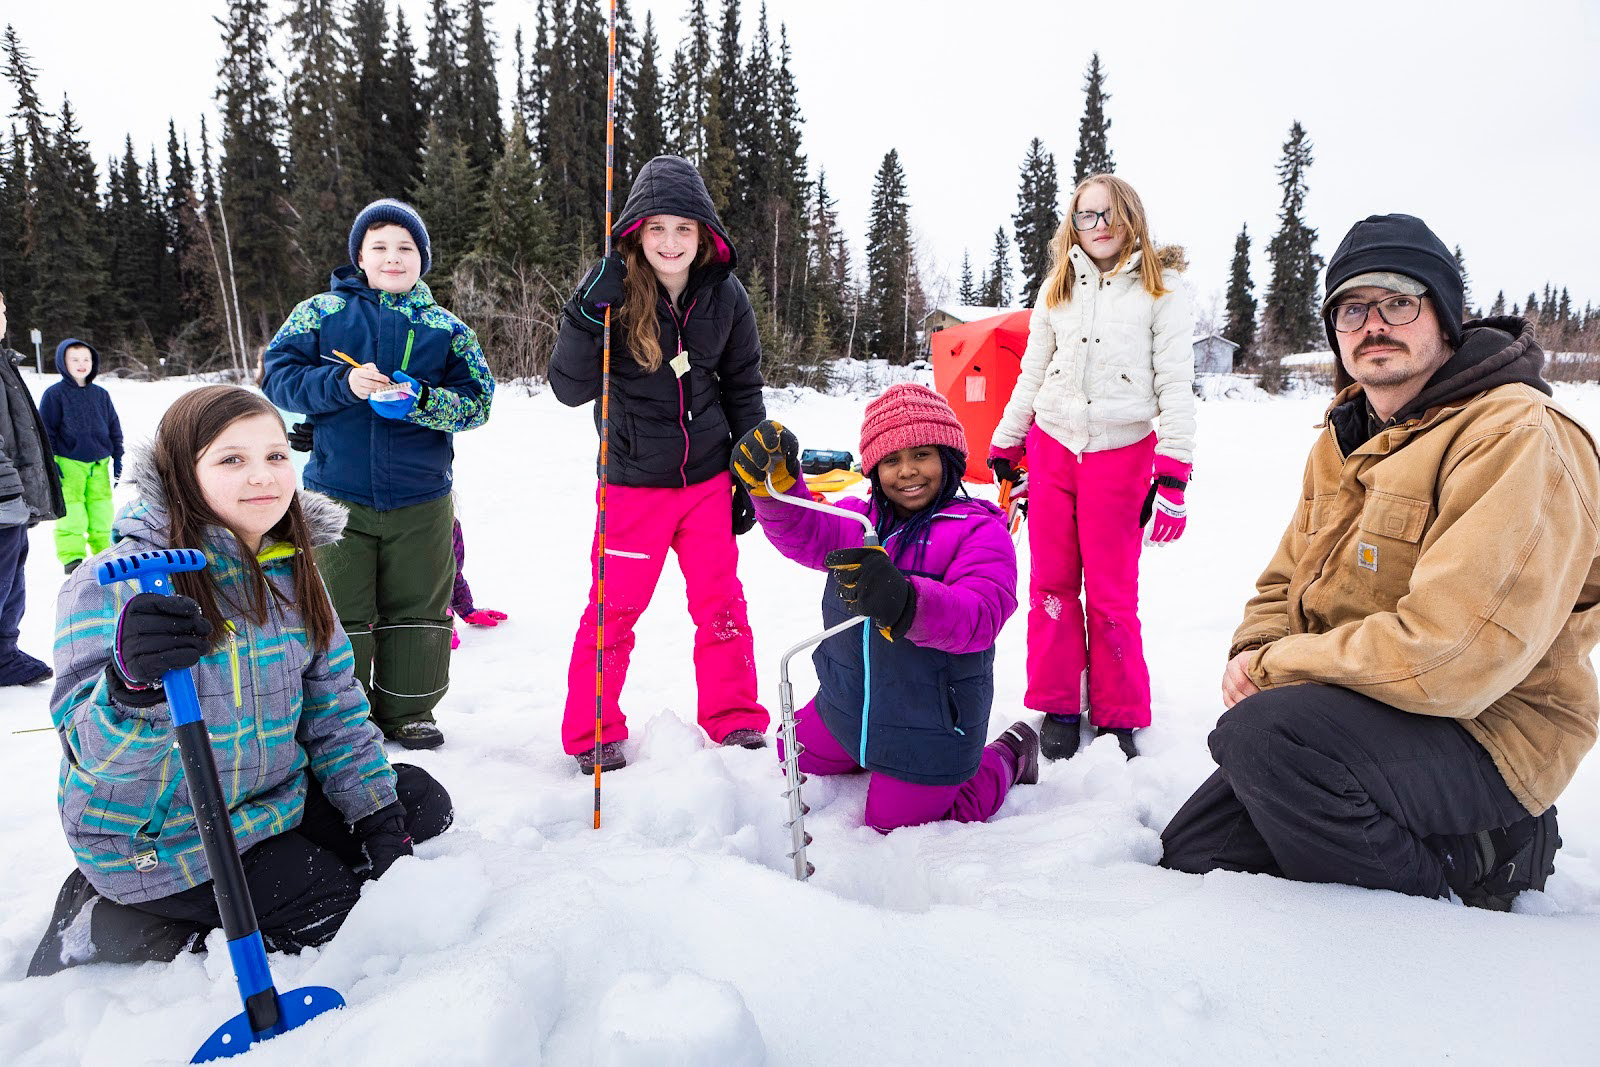 An adult and a group of children in colorful clothing drill a hole through the snow and ice.